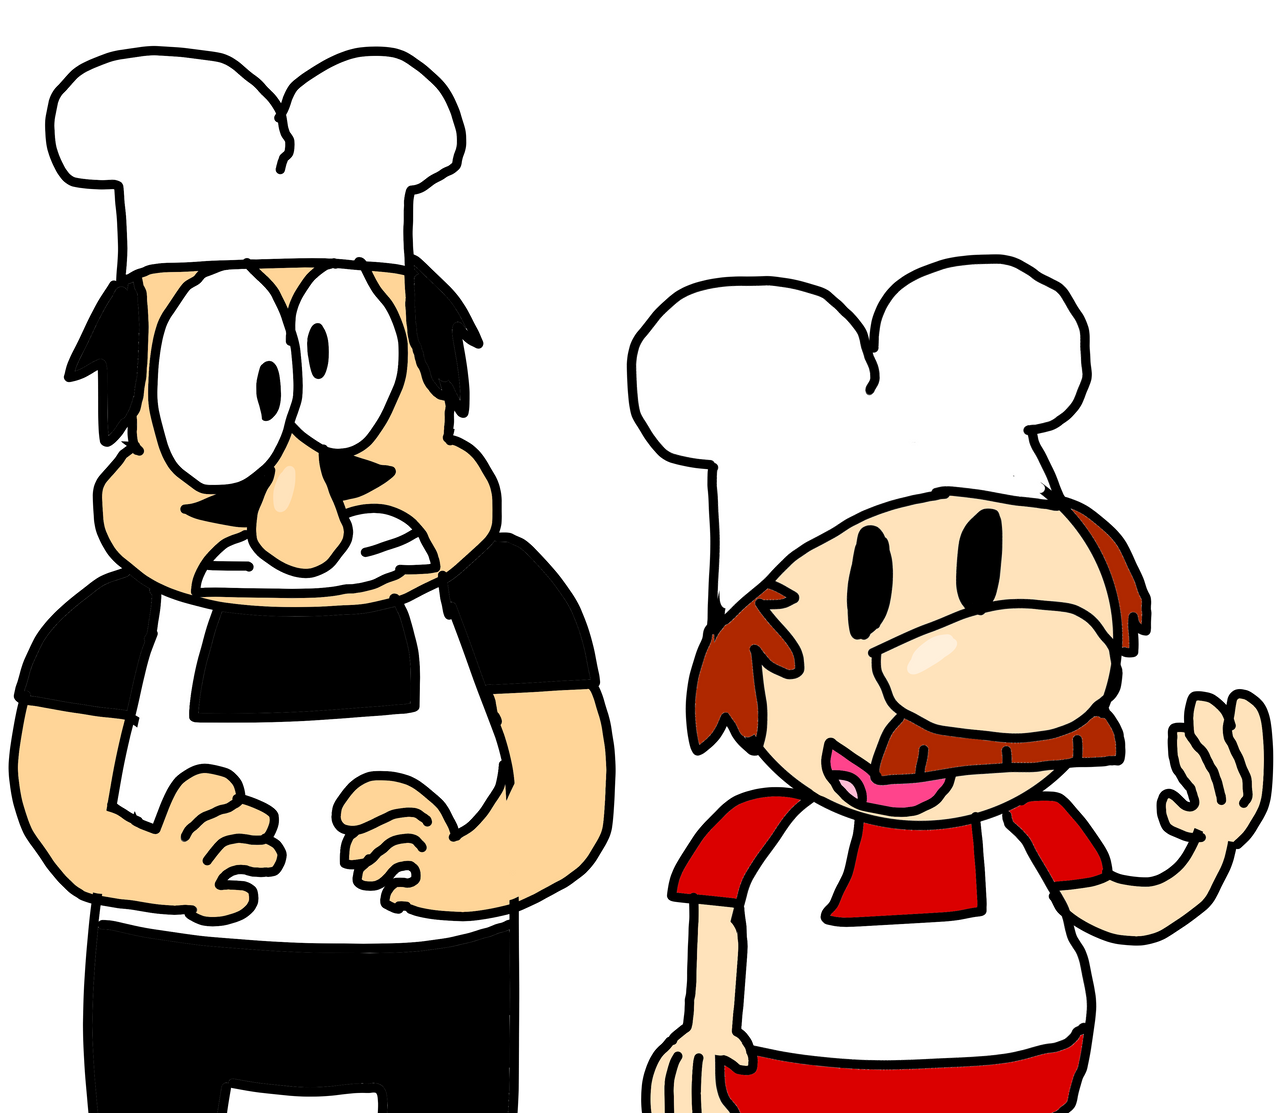 Peppino and Gustavo by CalledRokket on DeviantArt